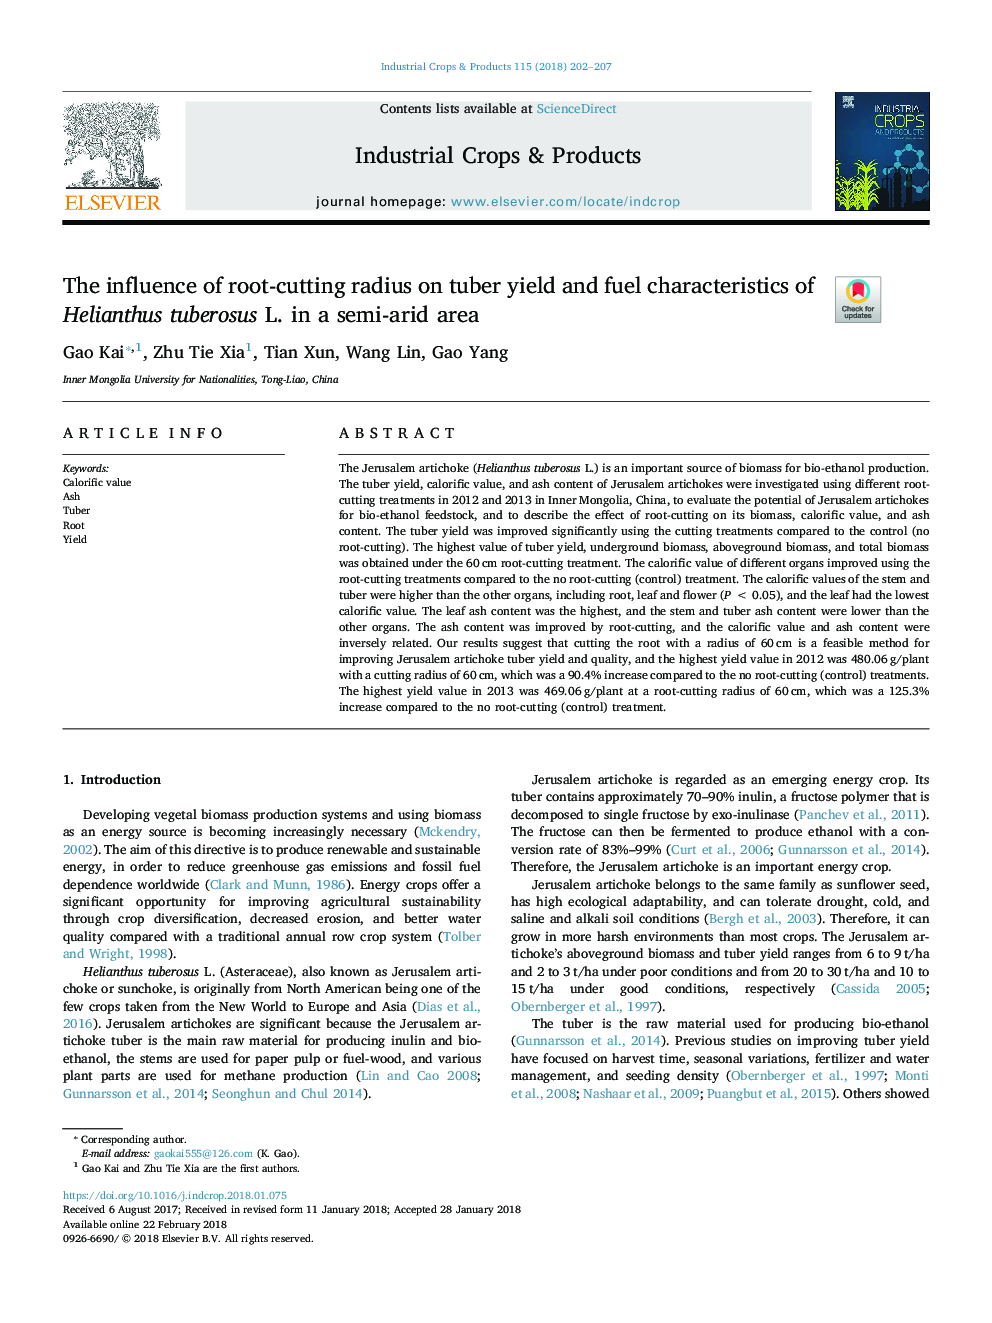 The influence of root-cutting radius on tuber yield and fuel characteristics of Helianthus tuberosus L. in a semi-arid area